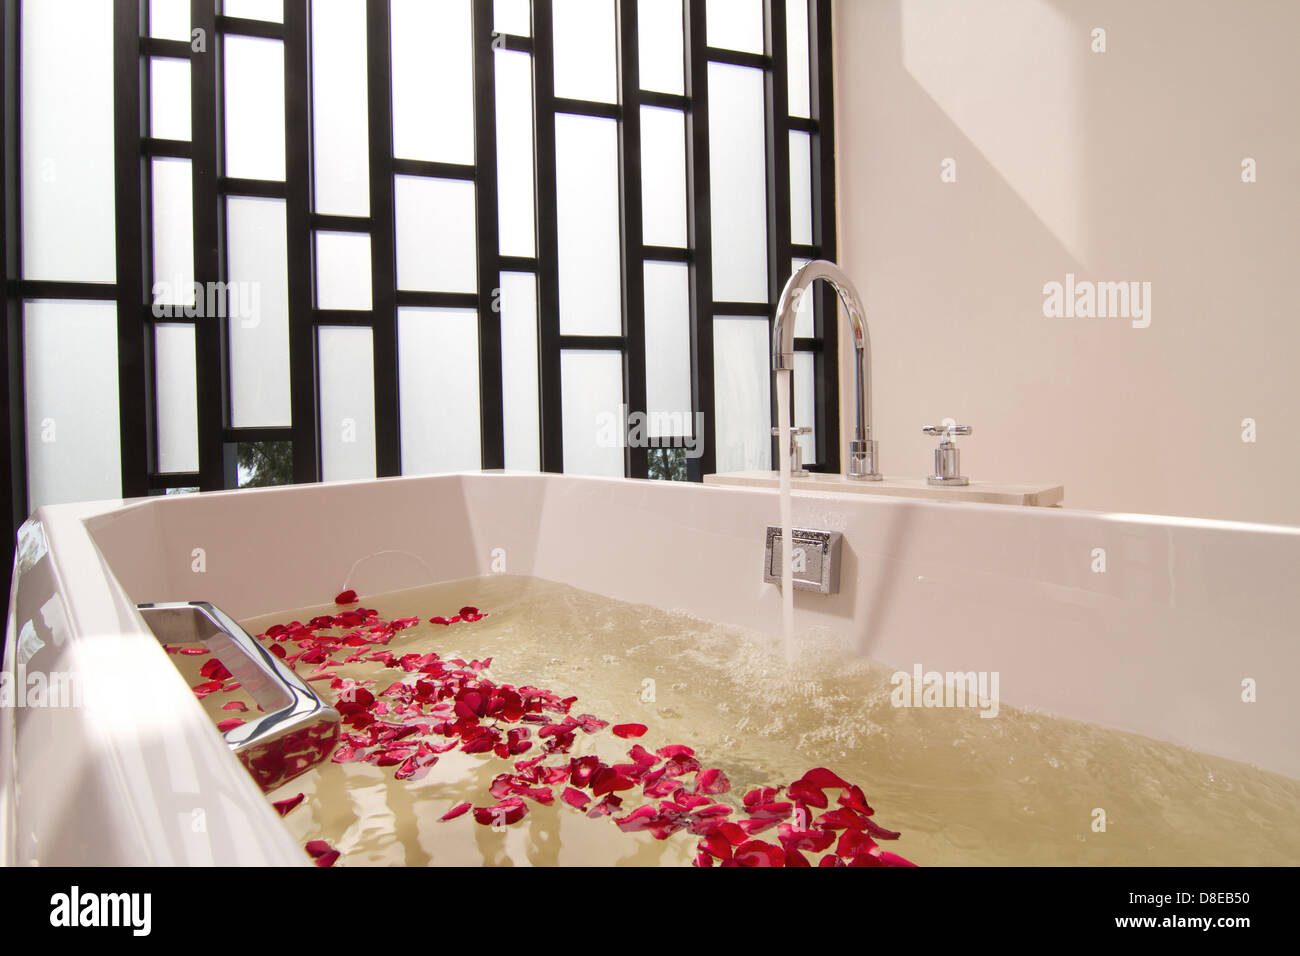 Luxury bath tub with water and flowers Stock Photo